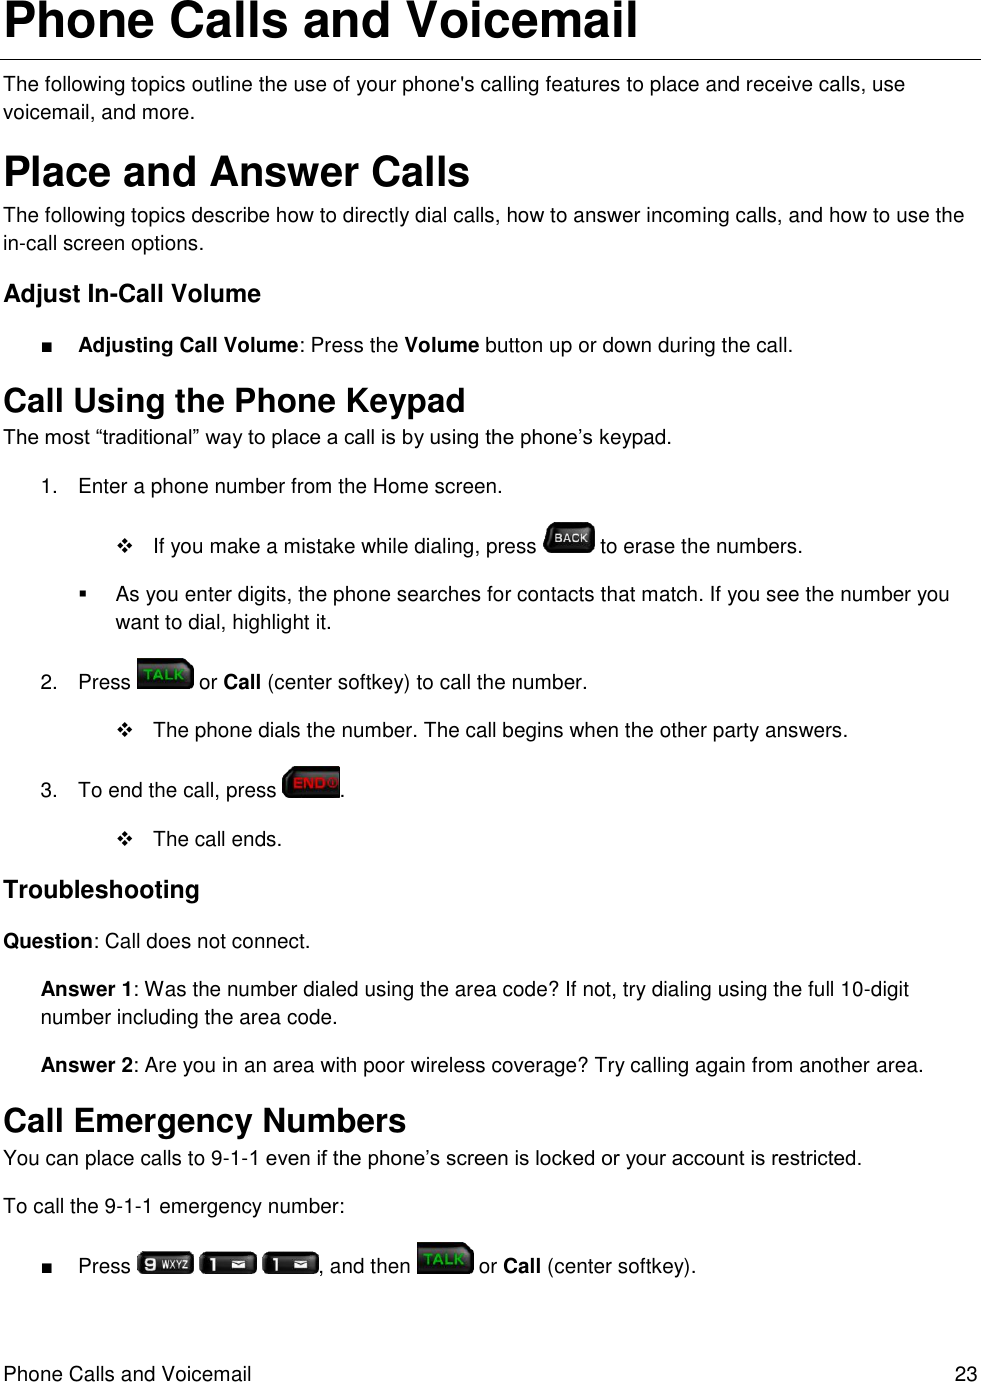 Phone Calls and Voicemail  23 Phone Calls and Voicemail The following topics outline the use of your phone&apos;s calling features to place and receive calls, use voicemail, and more. Place and Answer Calls The following topics describe how to directly dial calls, how to answer incoming calls, and how to use the in-call screen options. Adjust In-Call Volume ■ Adjusting Call Volume: Press the Volume button up or down during the call. Call Using the Phone Keypad The most “traditional” way to place a call is by using the phone’s keypad.  1.  Enter a phone number from the Home screen.    If you make a mistake while dialing, press   to erase the numbers.   As you enter digits, the phone searches for contacts that match. If you see the number you want to dial, highlight it. 2.  Press   or Call (center softkey) to call the number.   The phone dials the number. The call begins when the other party answers. 3.  To end the call, press  .    The call ends. Troubleshooting Question: Call does not connect. Answer 1: Was the number dialed using the area code? If not, try dialing using the full 10-digit number including the area code. Answer 2: Are you in an area with poor wireless coverage? Try calling again from another area. Call Emergency Numbers You can place calls to 9-1-1 even if the phone’s screen is locked or your account is restricted. To call the 9-1-1 emergency number: ■  Press      , and then   or Call (center softkey). 